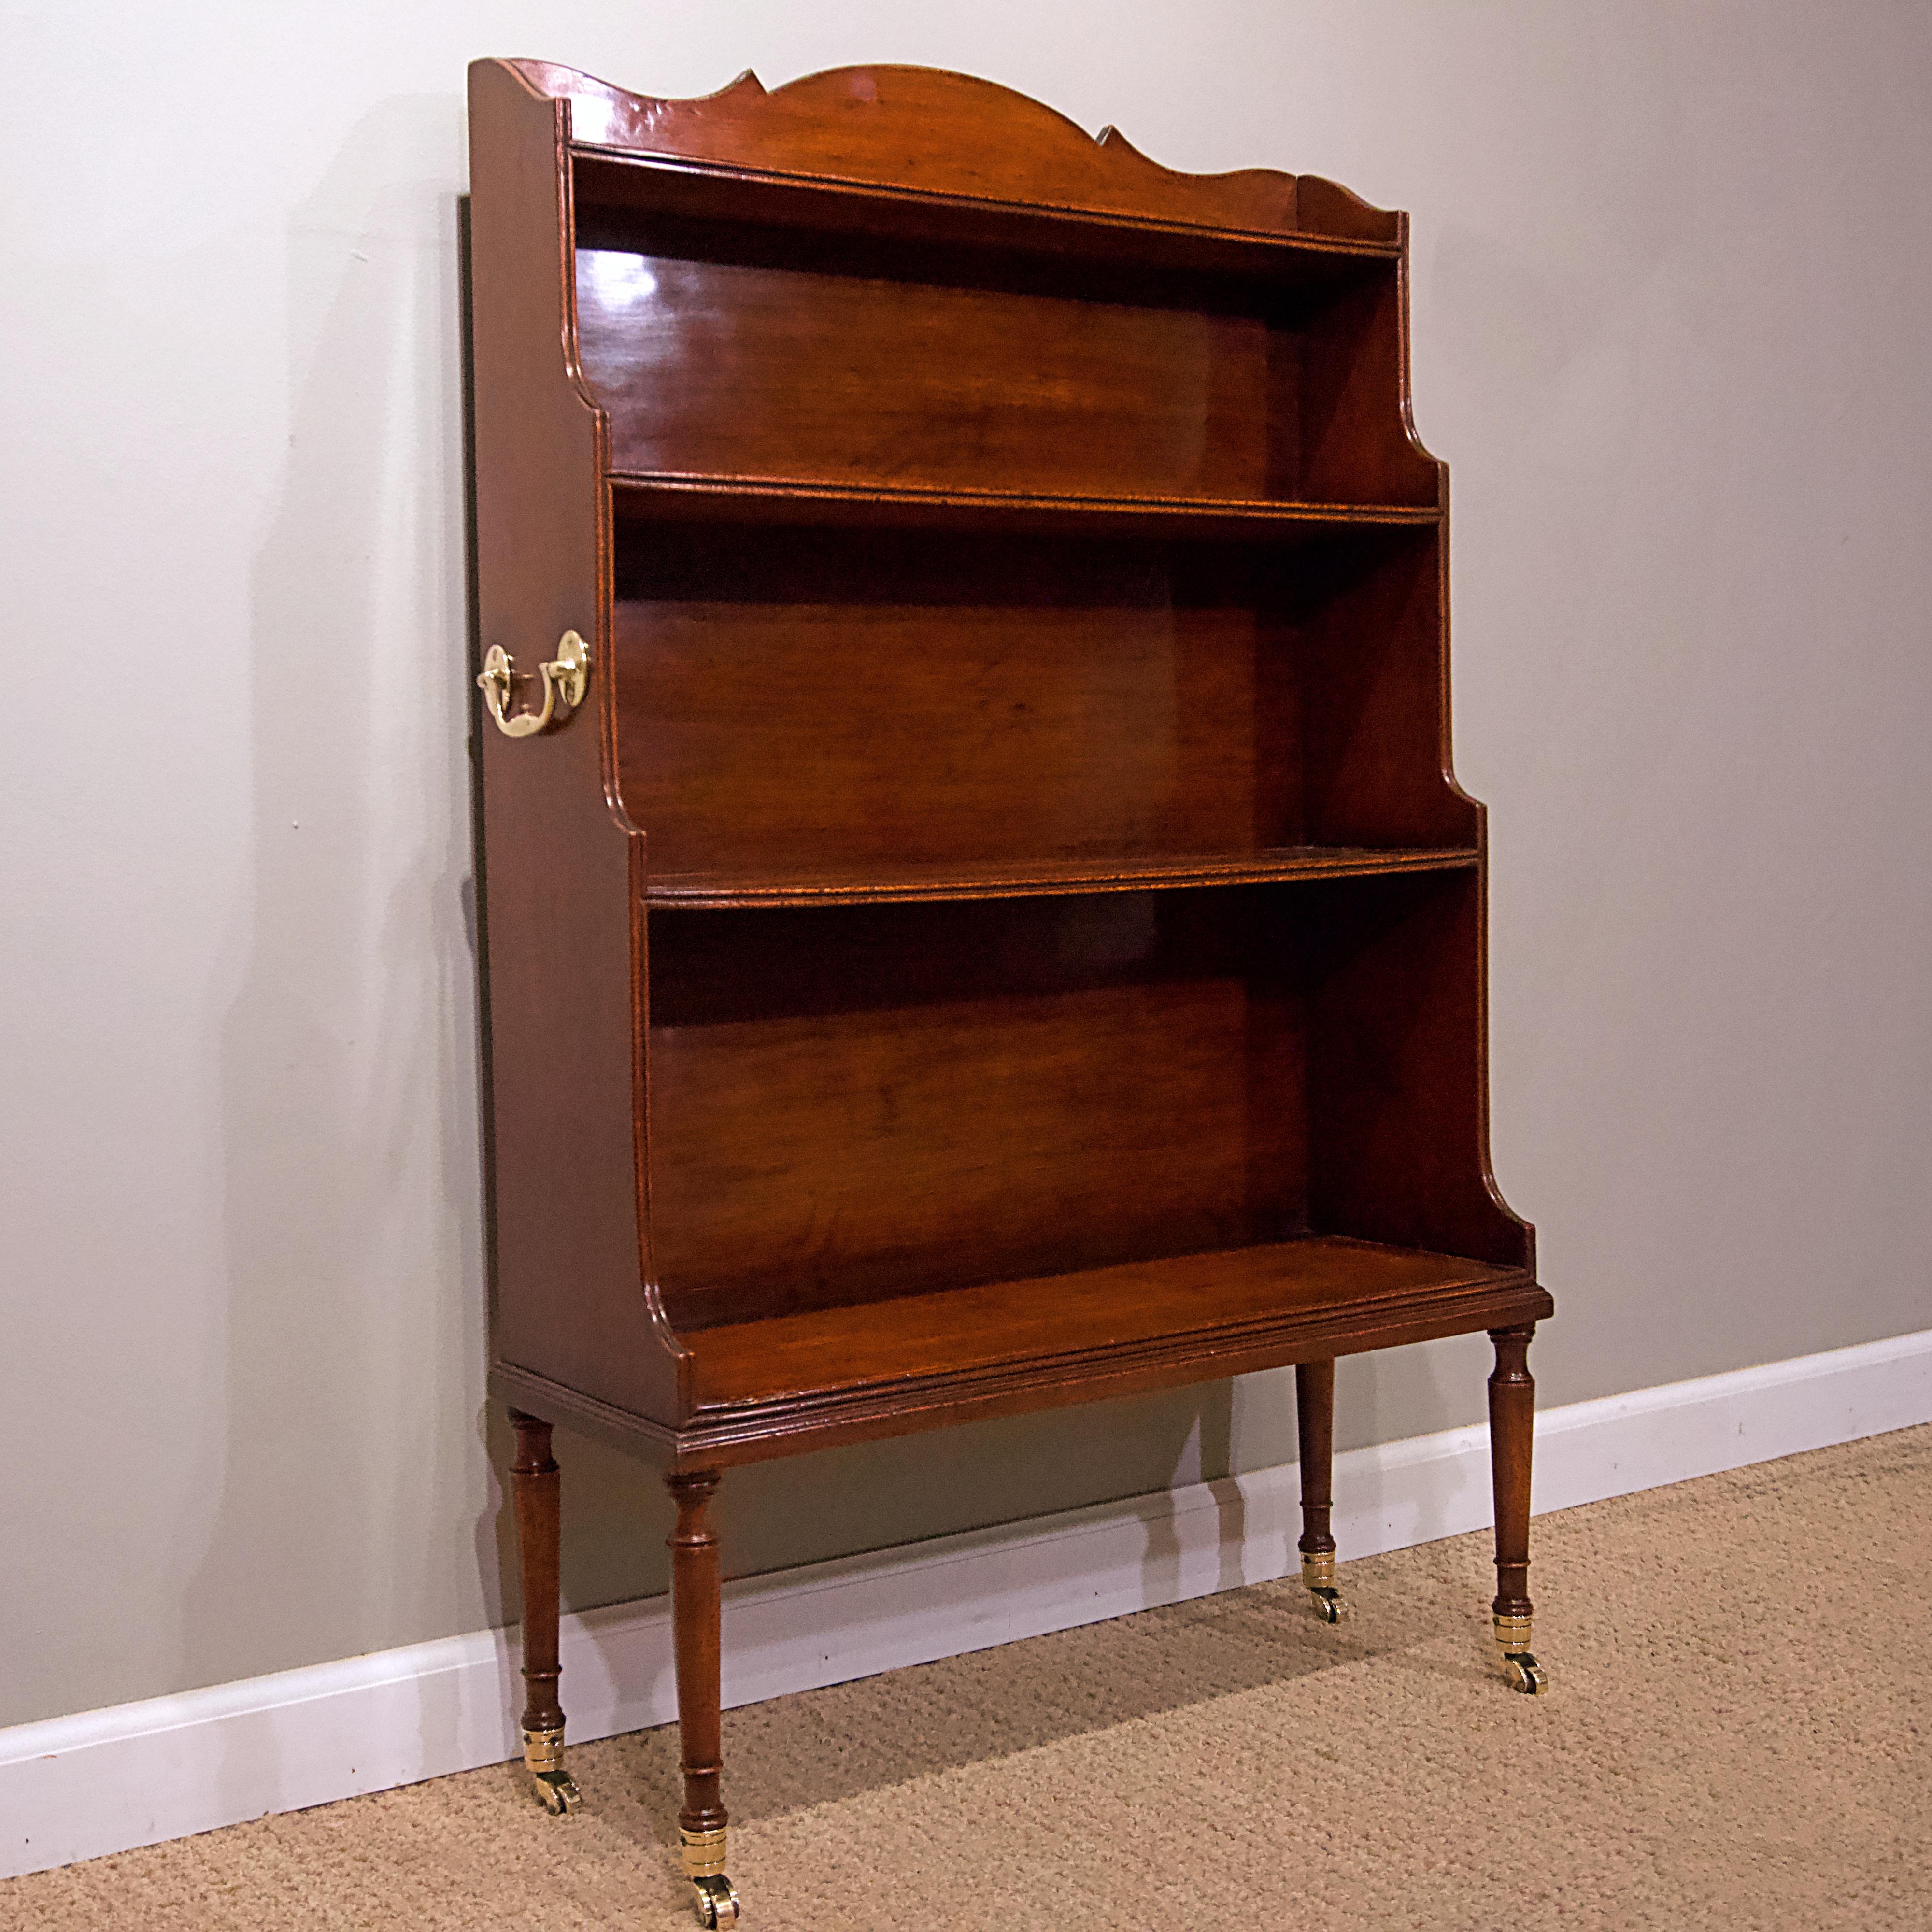 George IV mahogany library bookcase with brass castors.